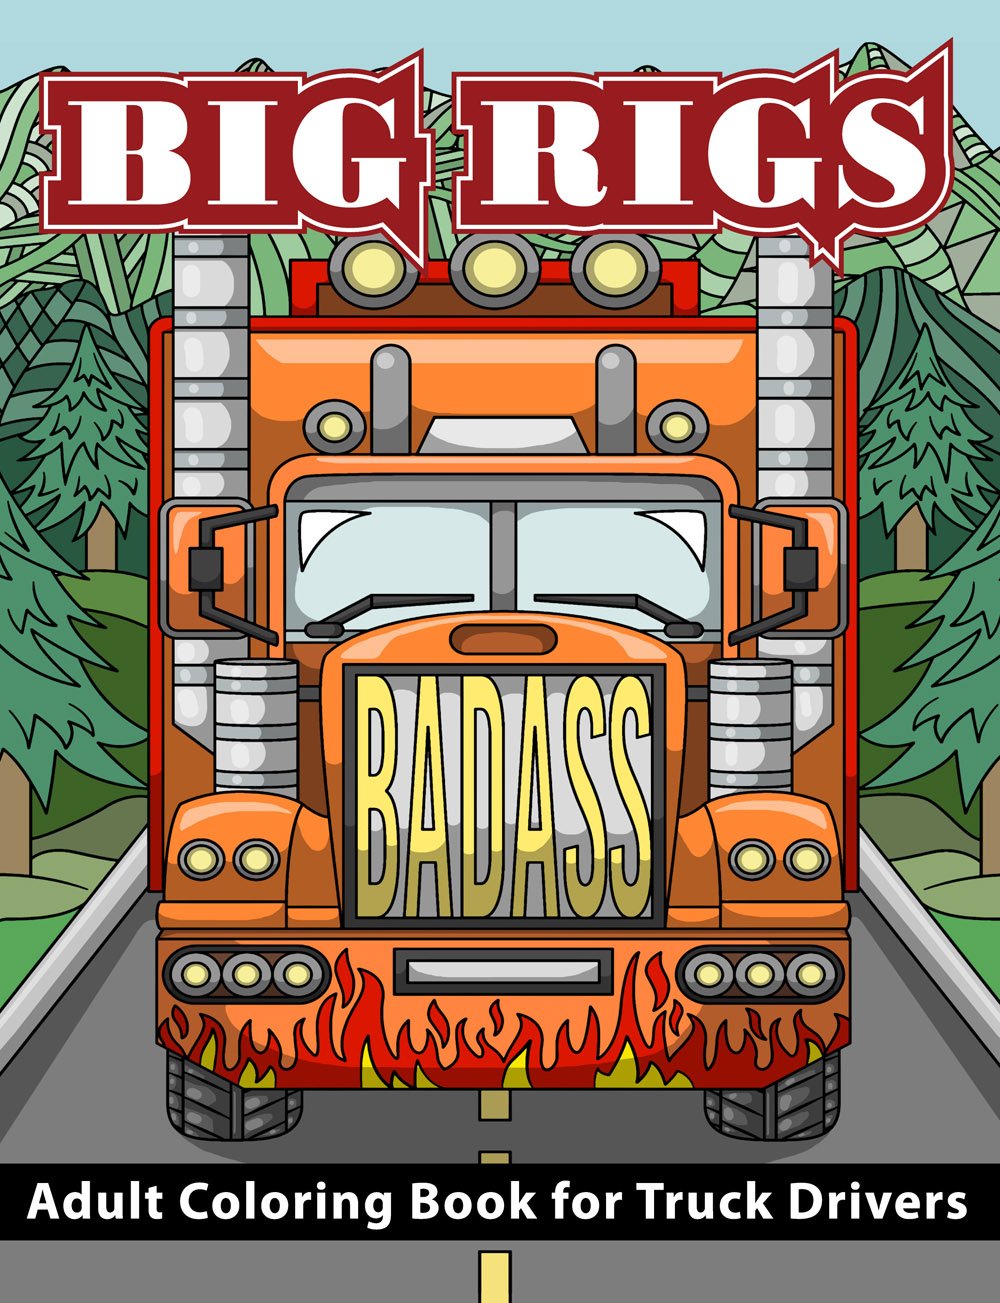 Big-Rigs-Adult-Coloring-Book-Cover